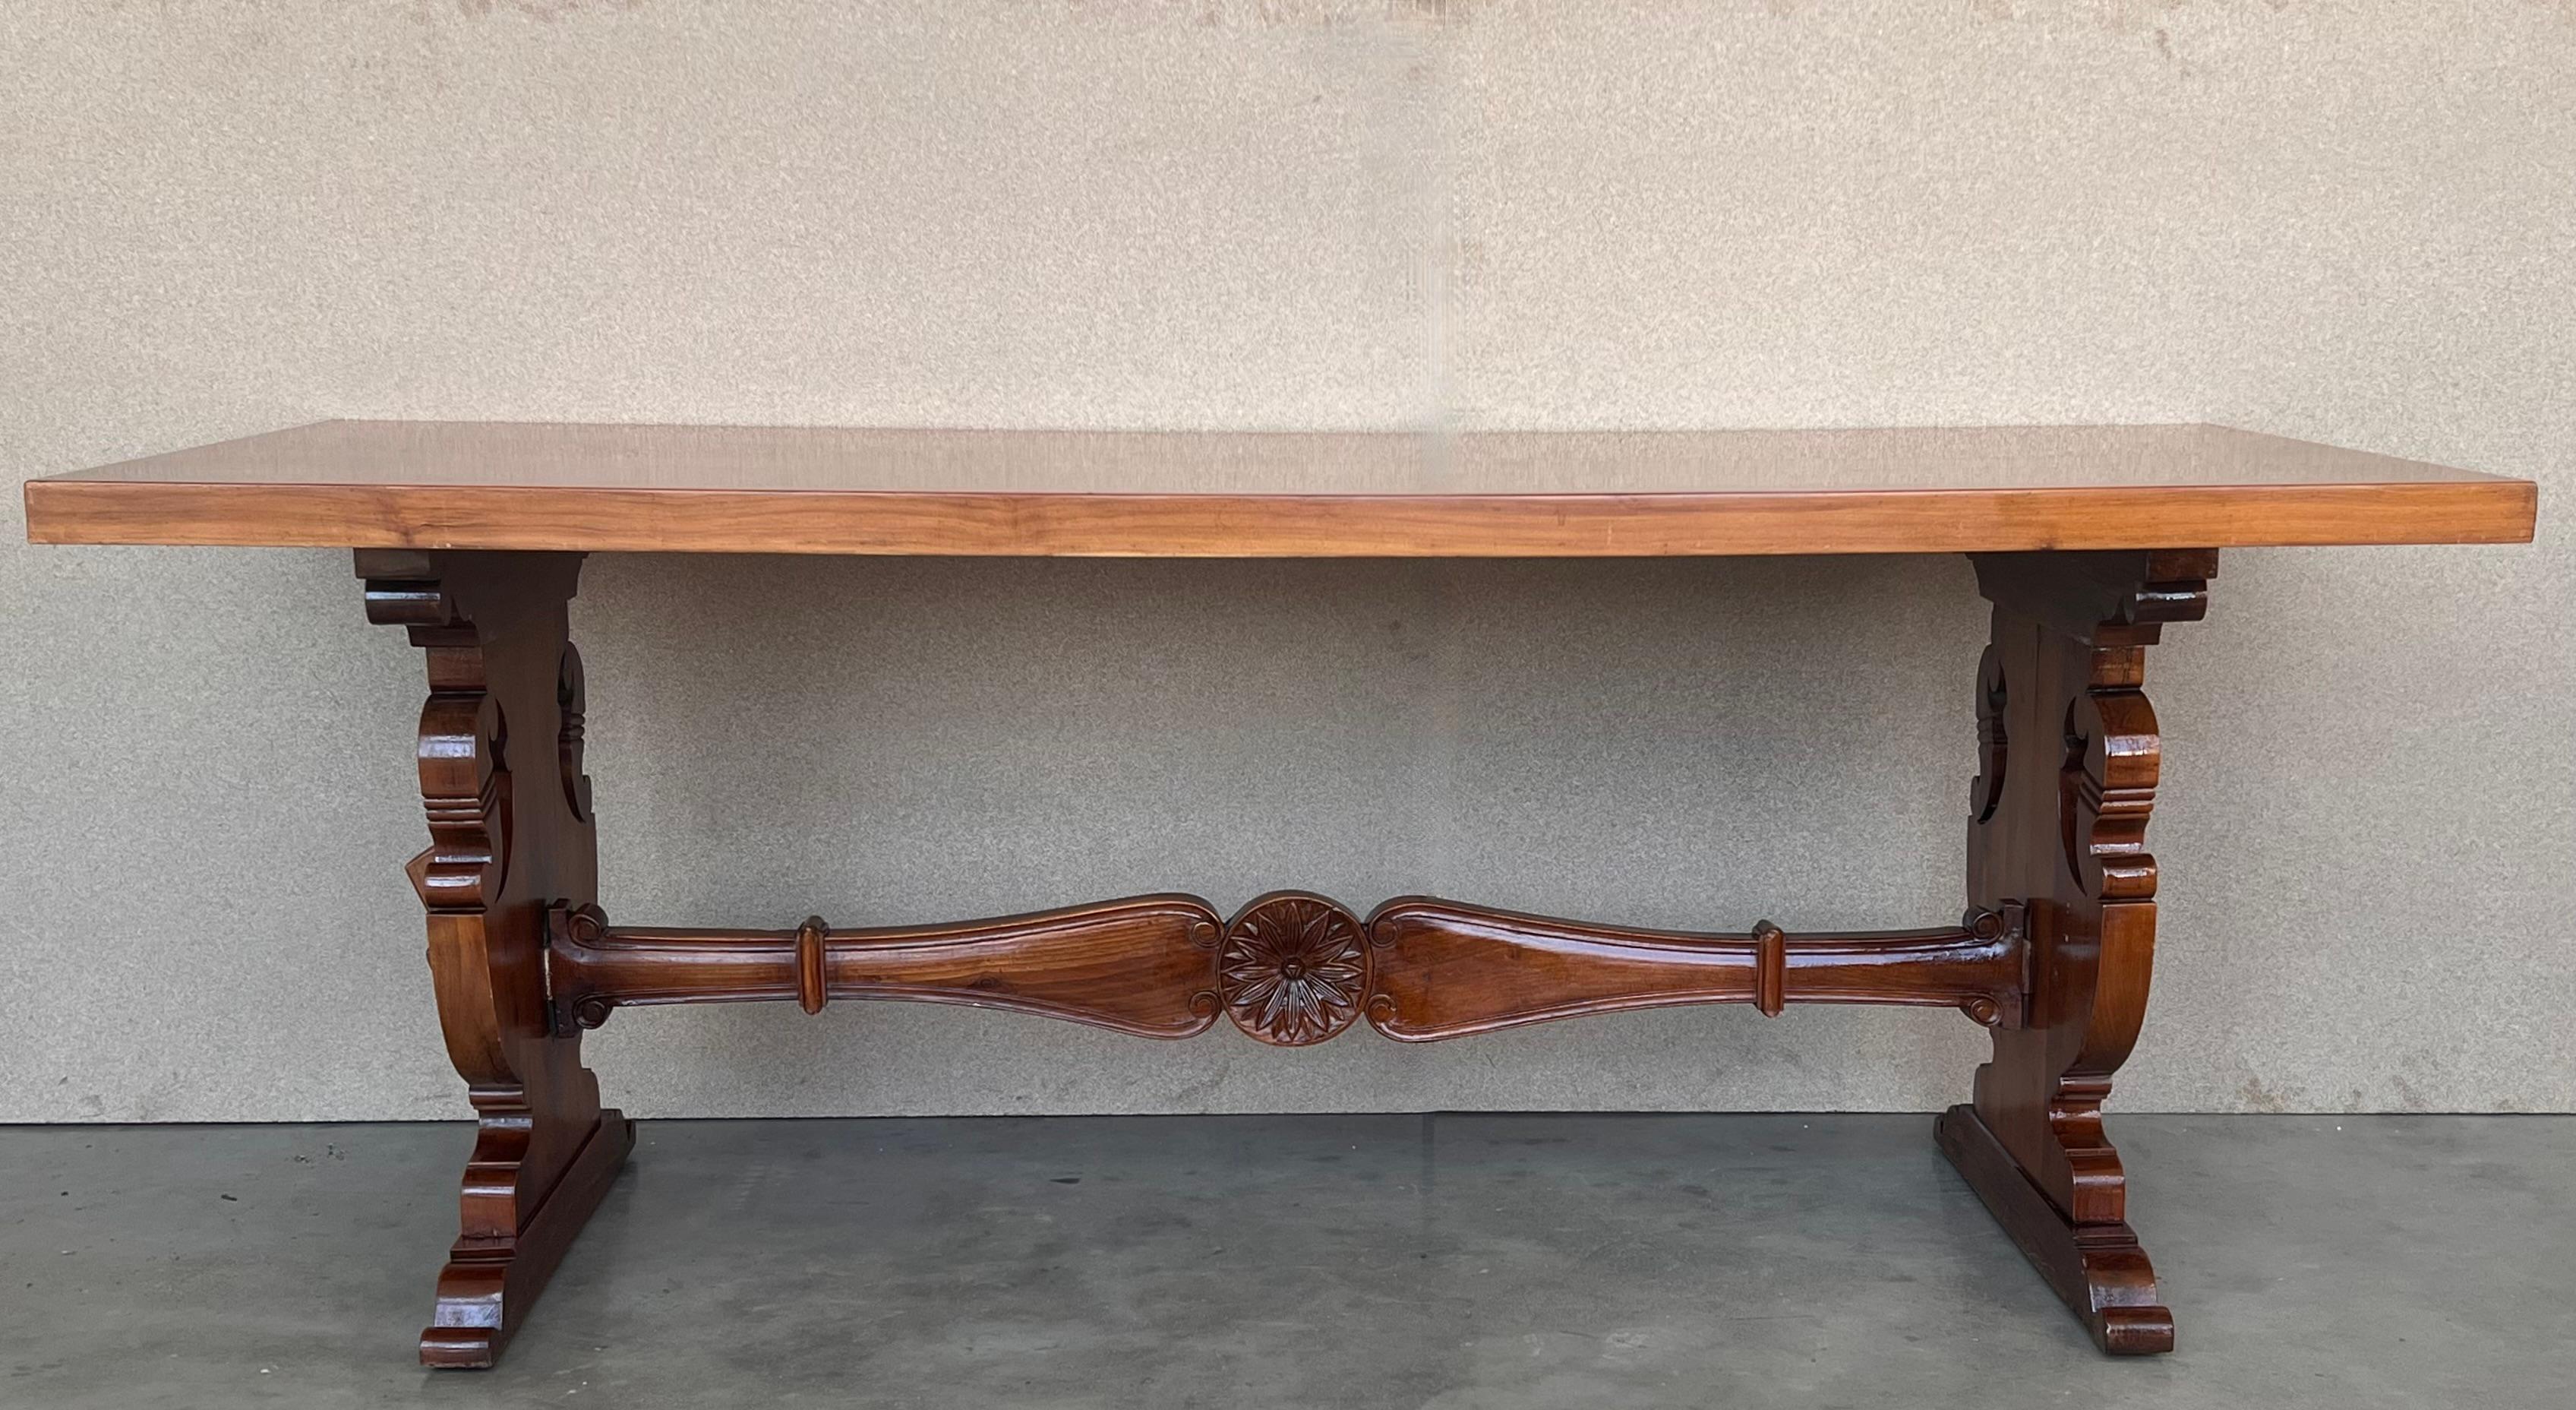 20th Century Spanish Baroque Carved Walnut Lyre Legs Trestle Dining Farm Table In Good Condition For Sale In Miami, FL